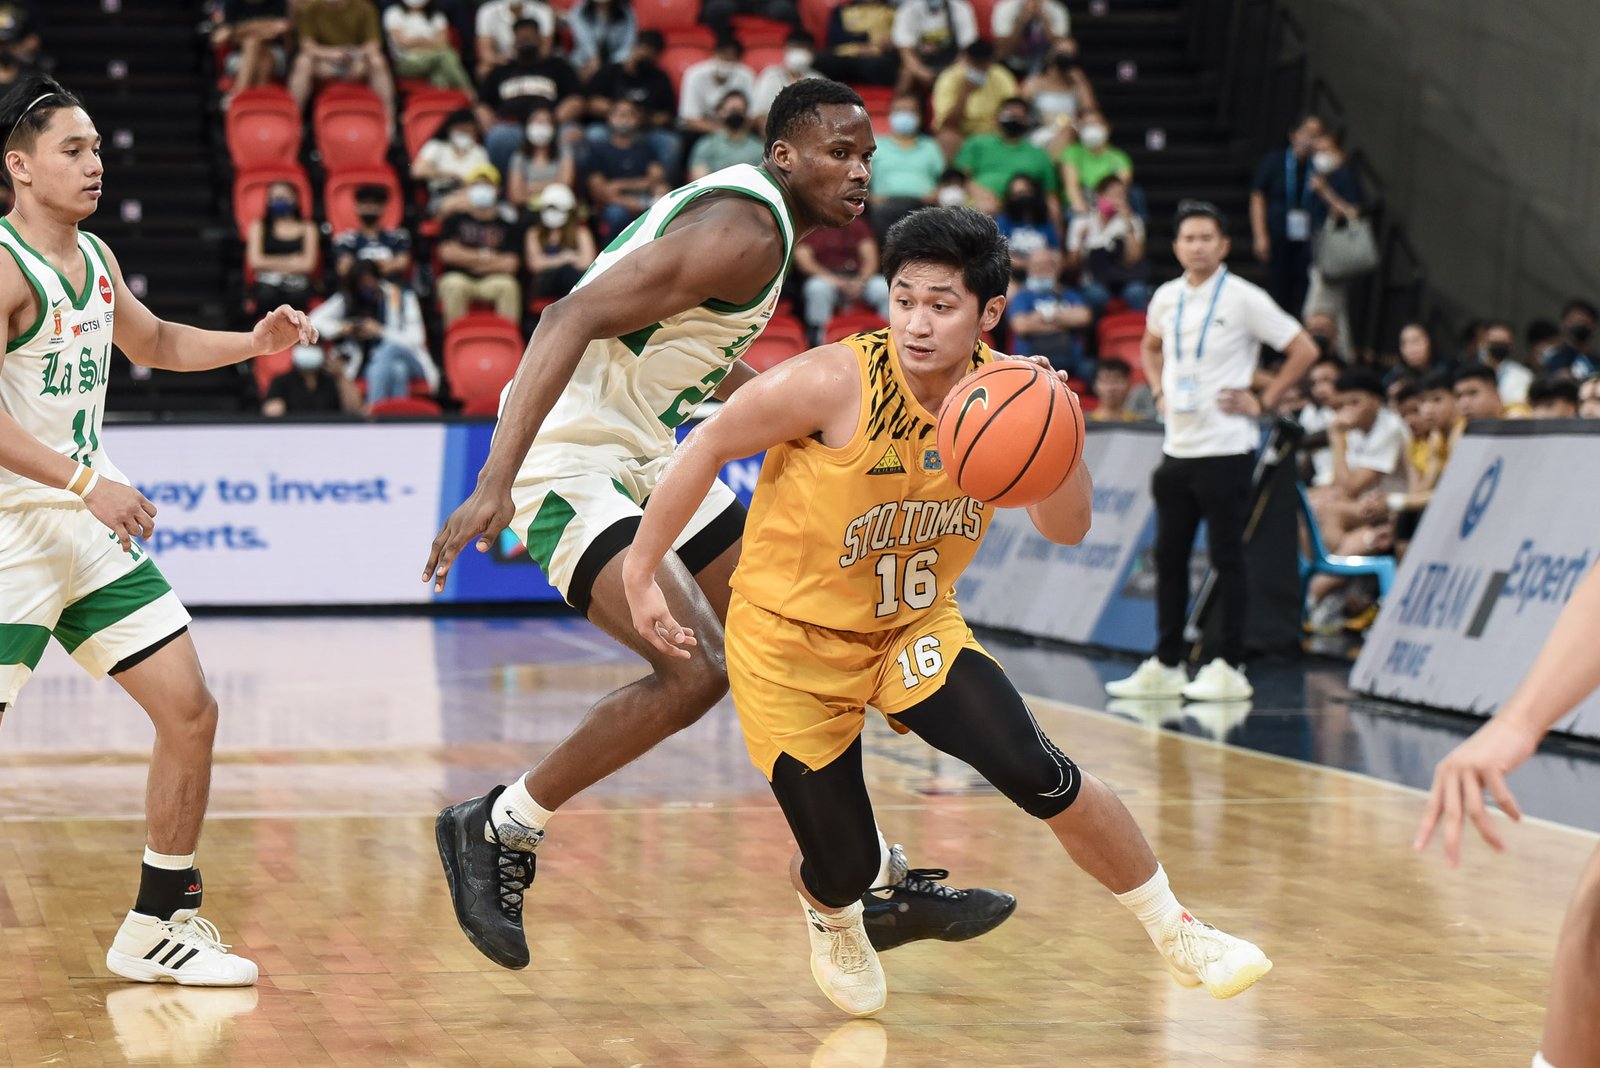 Paul Manalang of the UST Growling Tigers [UAAP photo]